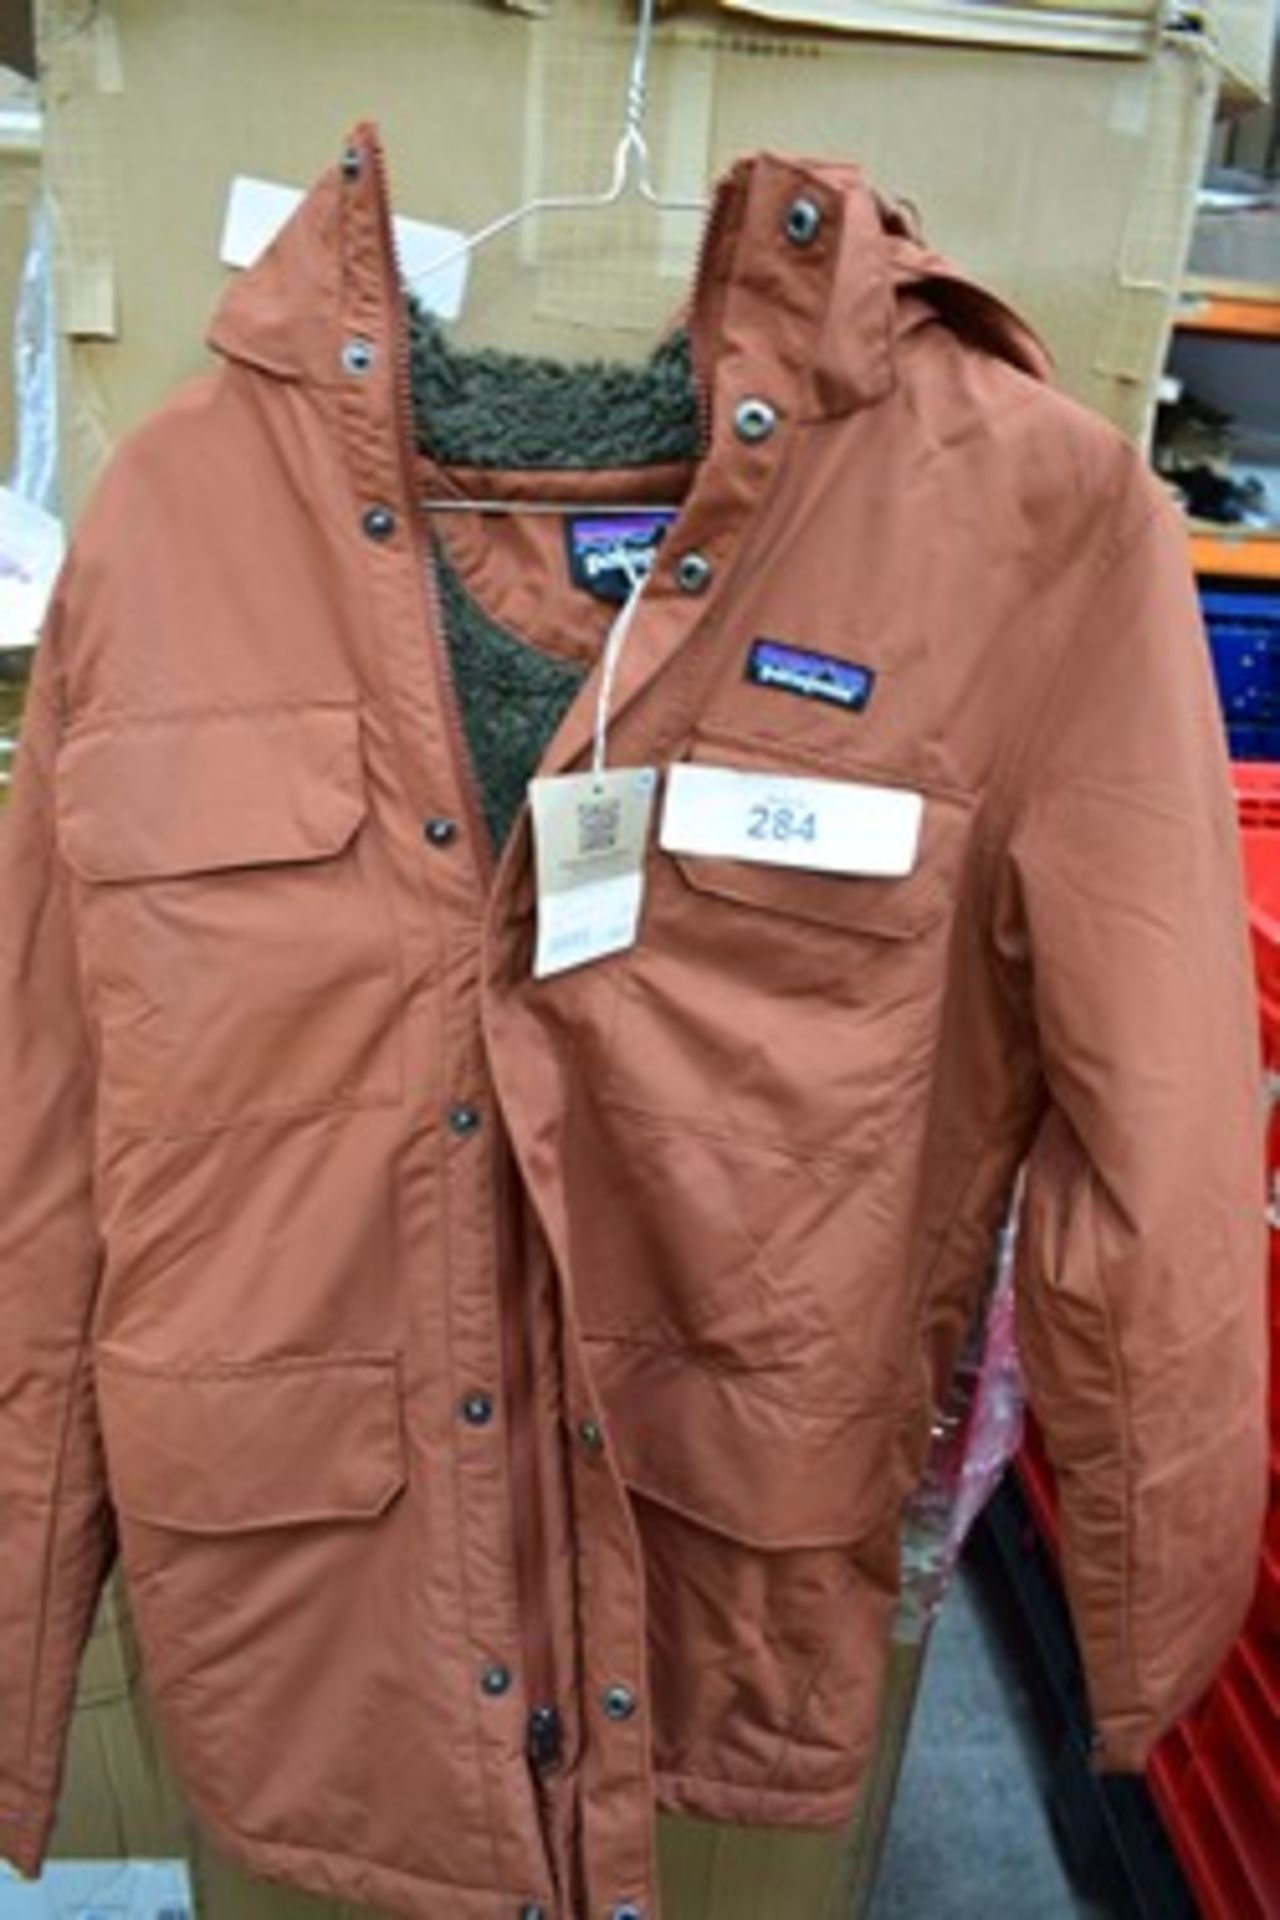 1 x Patagonia Isthmus SBU brown parka coat, size S, RRP: Â£240 - new with labels (CR1)